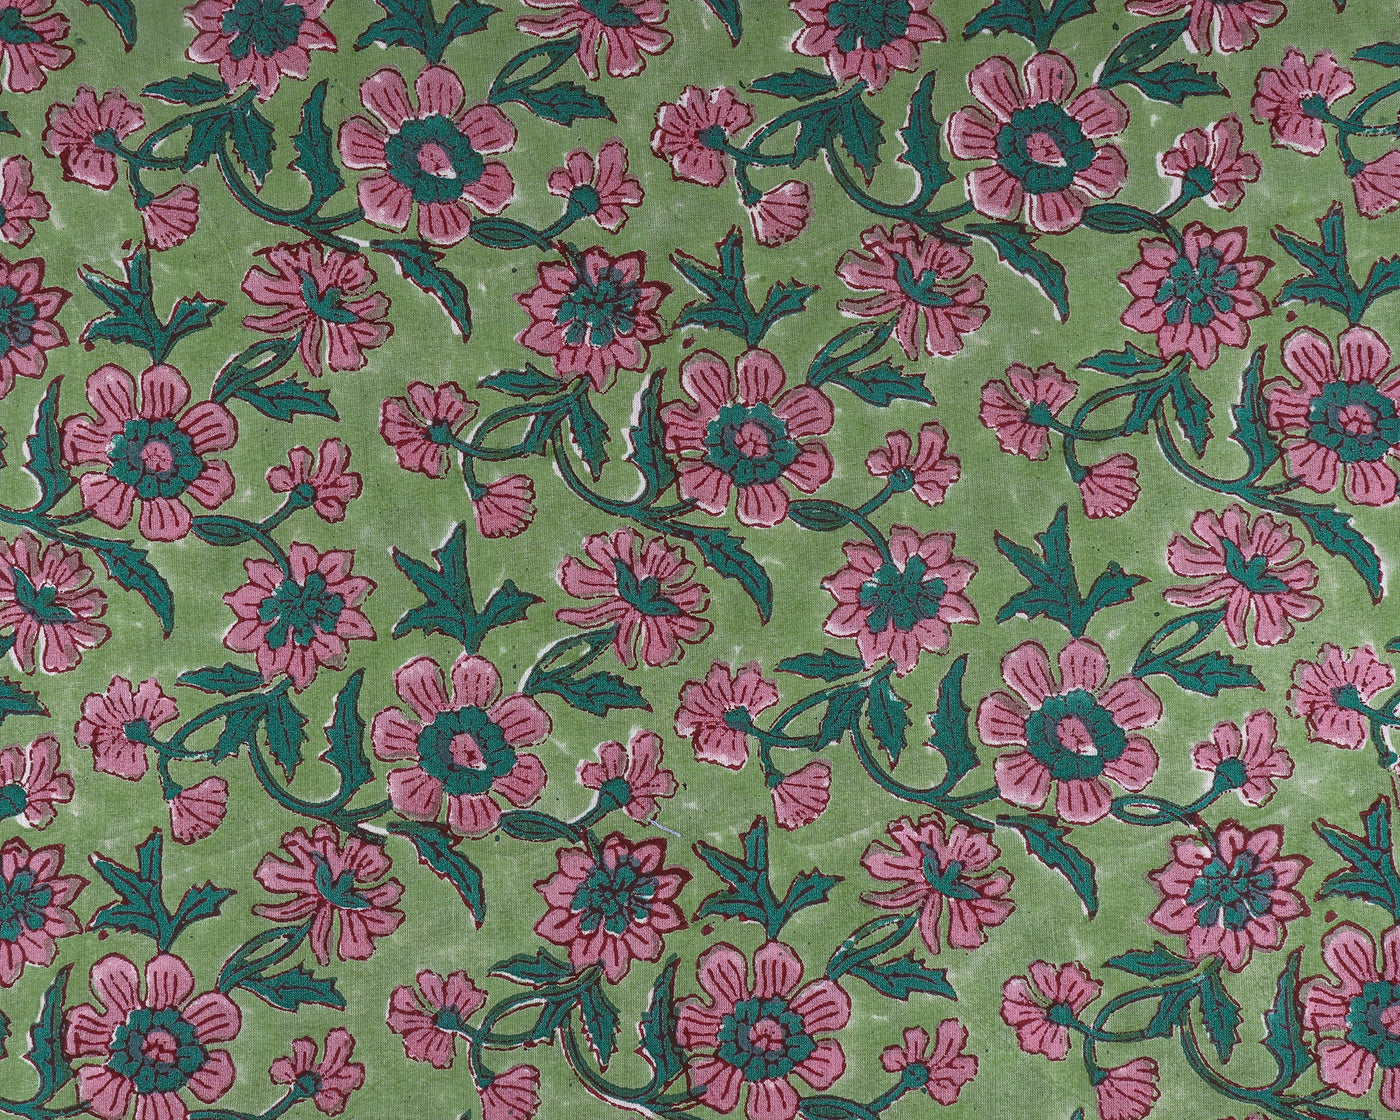 Mint and Pine Green, Salmon Pink Indian Floral Hand Block Printed 100% Pure Cotton Cloth, Fabric by the yard, Women's Clothing Curtains Bags